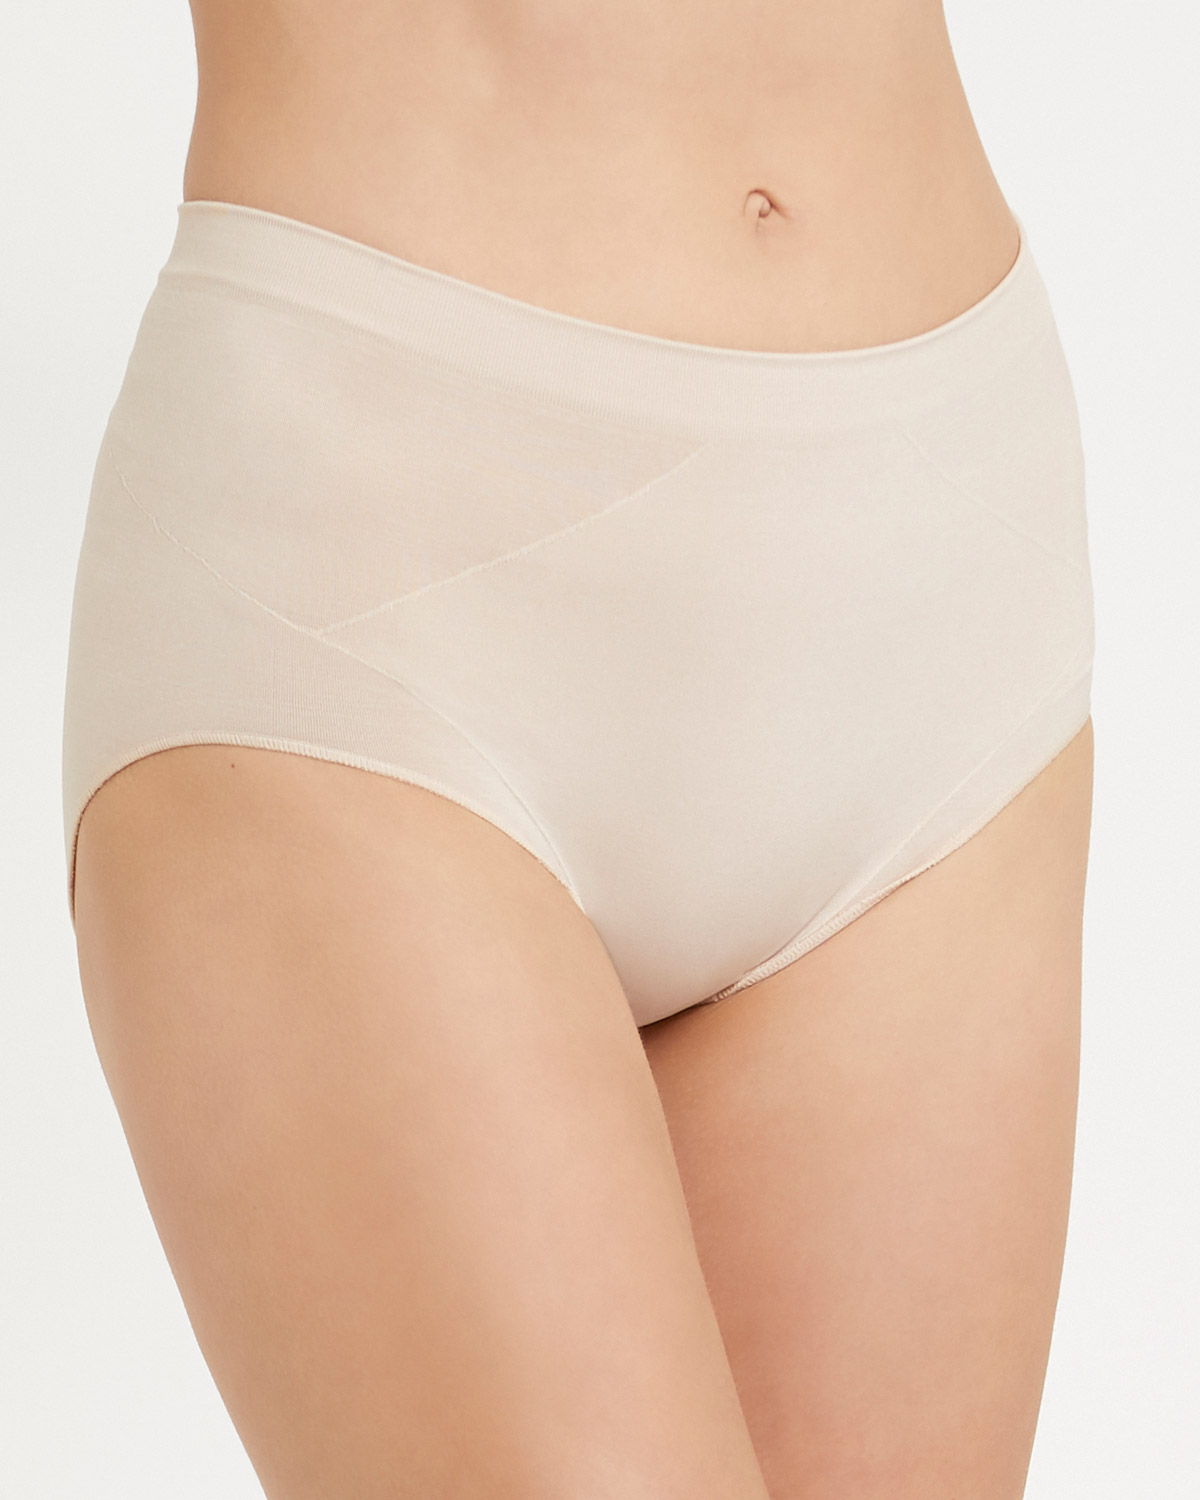 Dunnes Nude Wear Your Own Bra Firm Control Shaping Slip - Size 12 to 20  (180902)